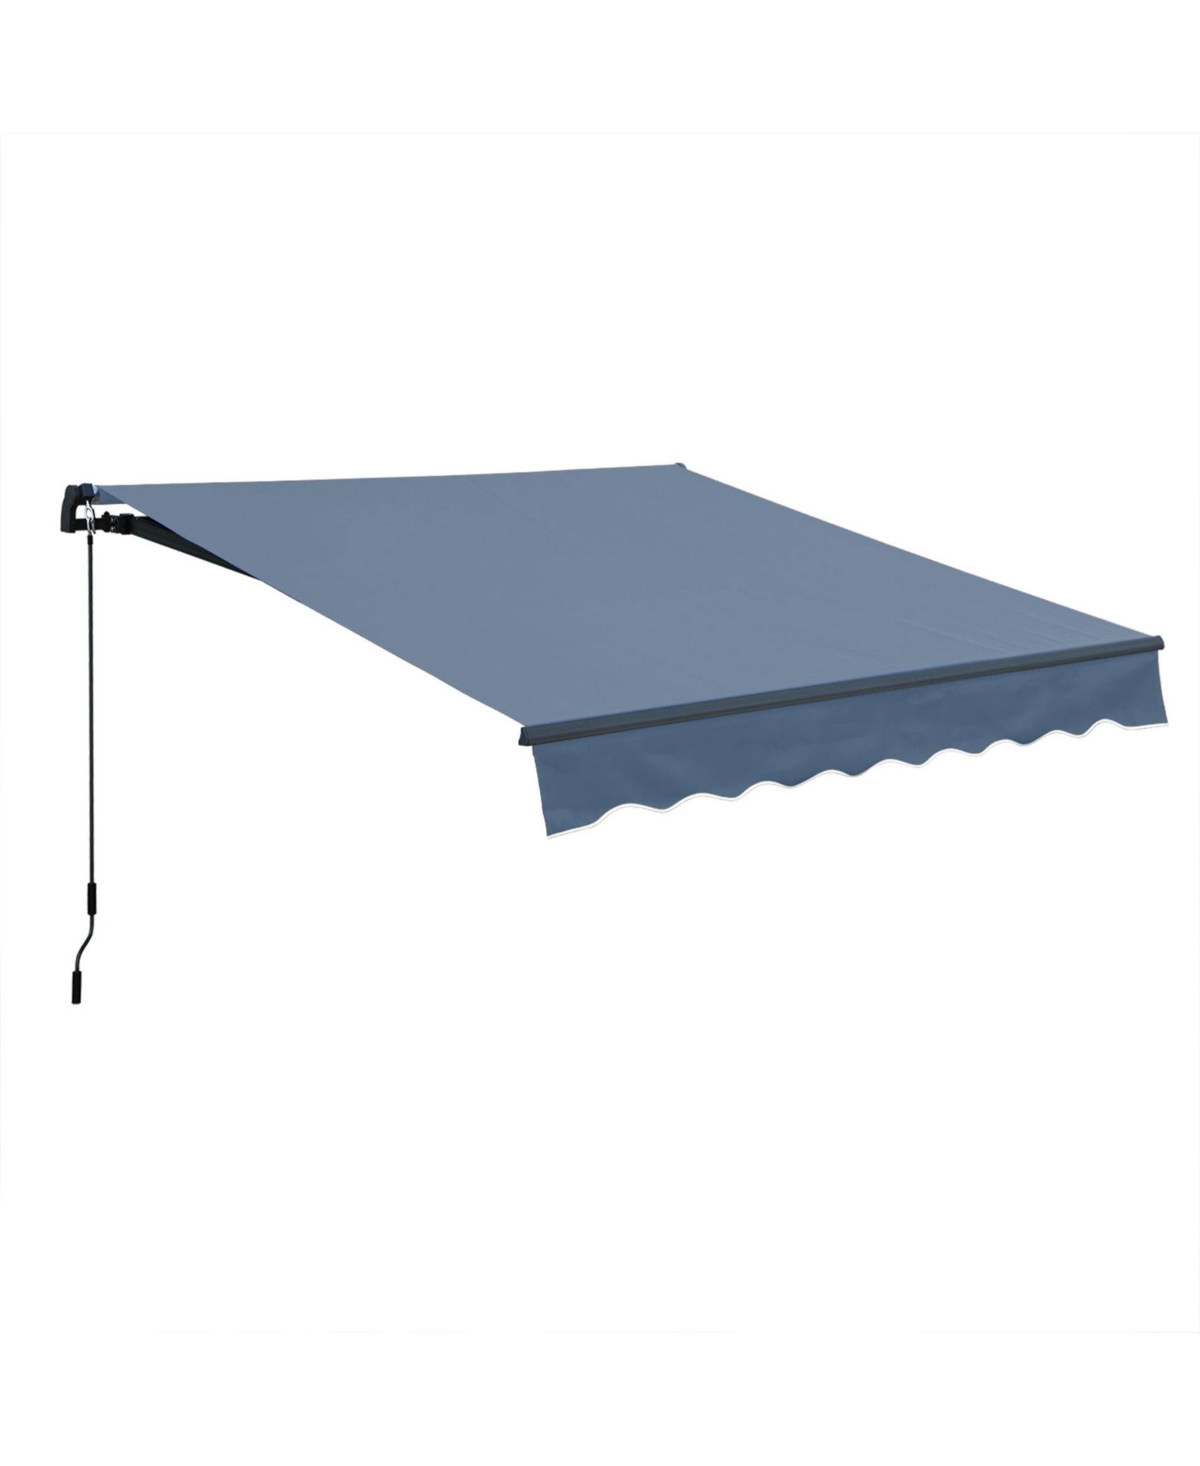 10' x 8' x 5' Retractable Window Awning Sunshade Shelter, Polyester Fabric, with Retractable Brackets and Two Wall Bases, fit for Yard, Patio,